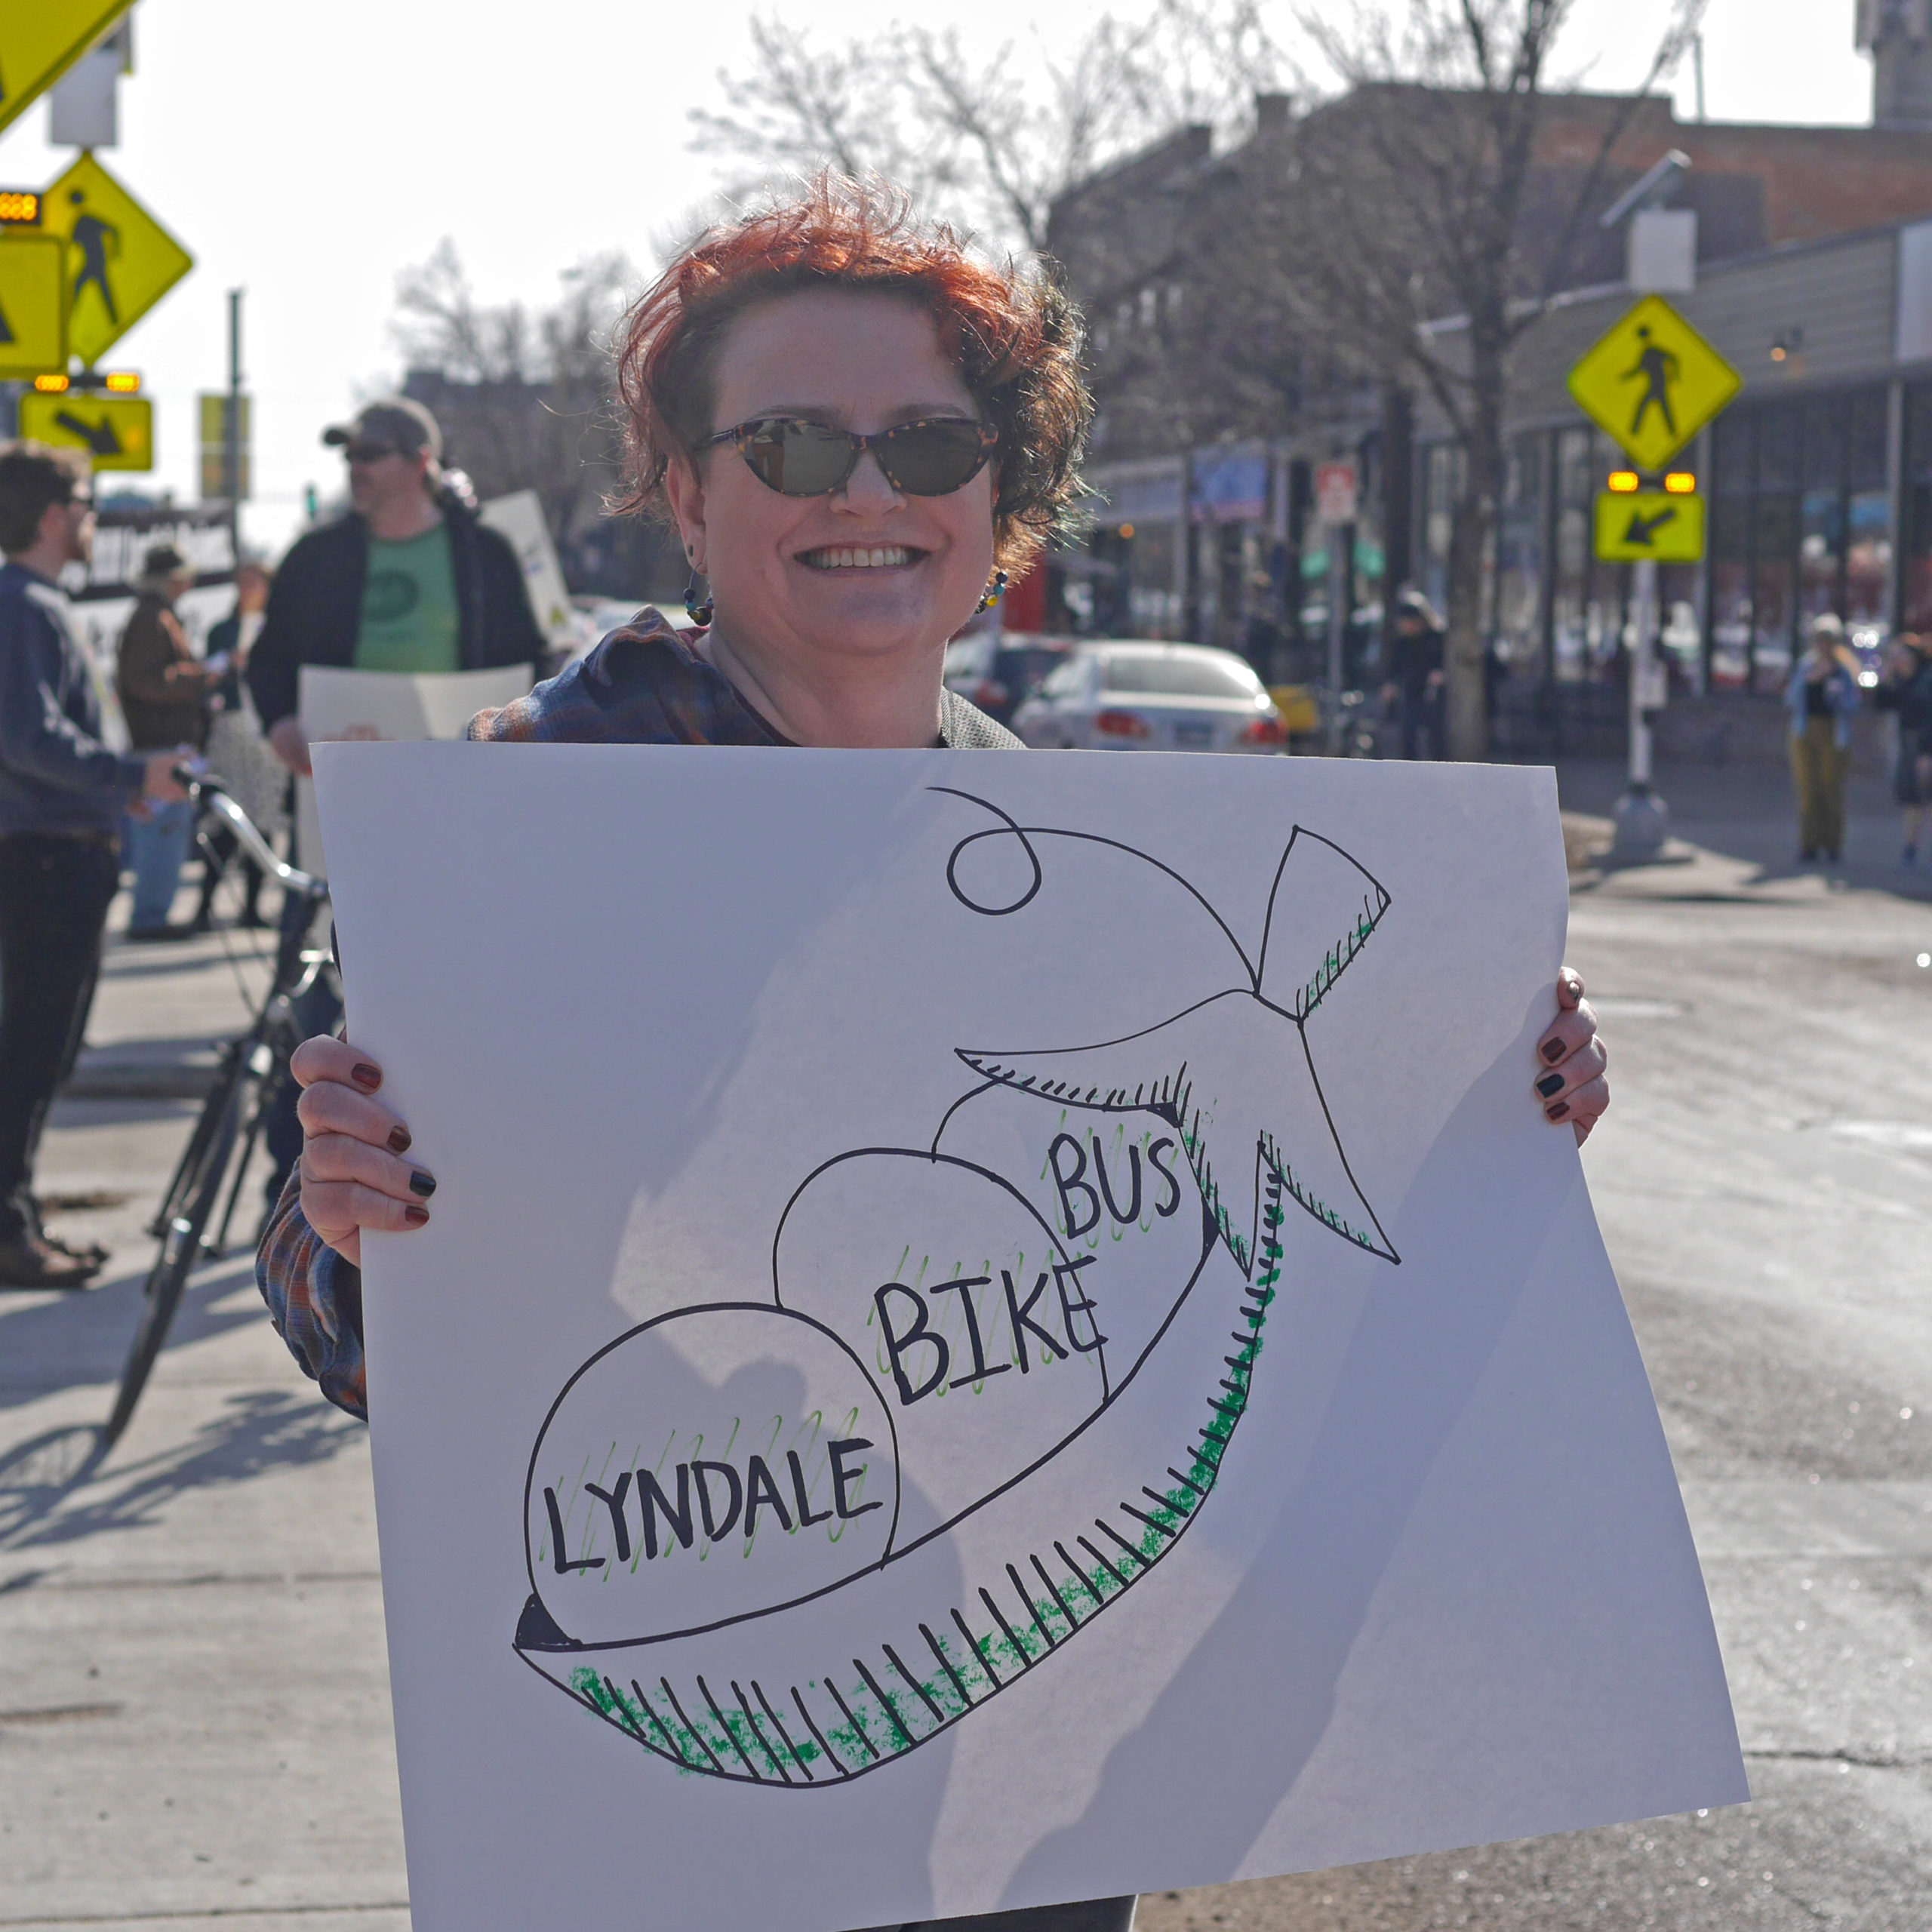 A community member holds a sign supporting biking and busing on Lyndale at the Livable Lyndale rally in Minneapolis. 